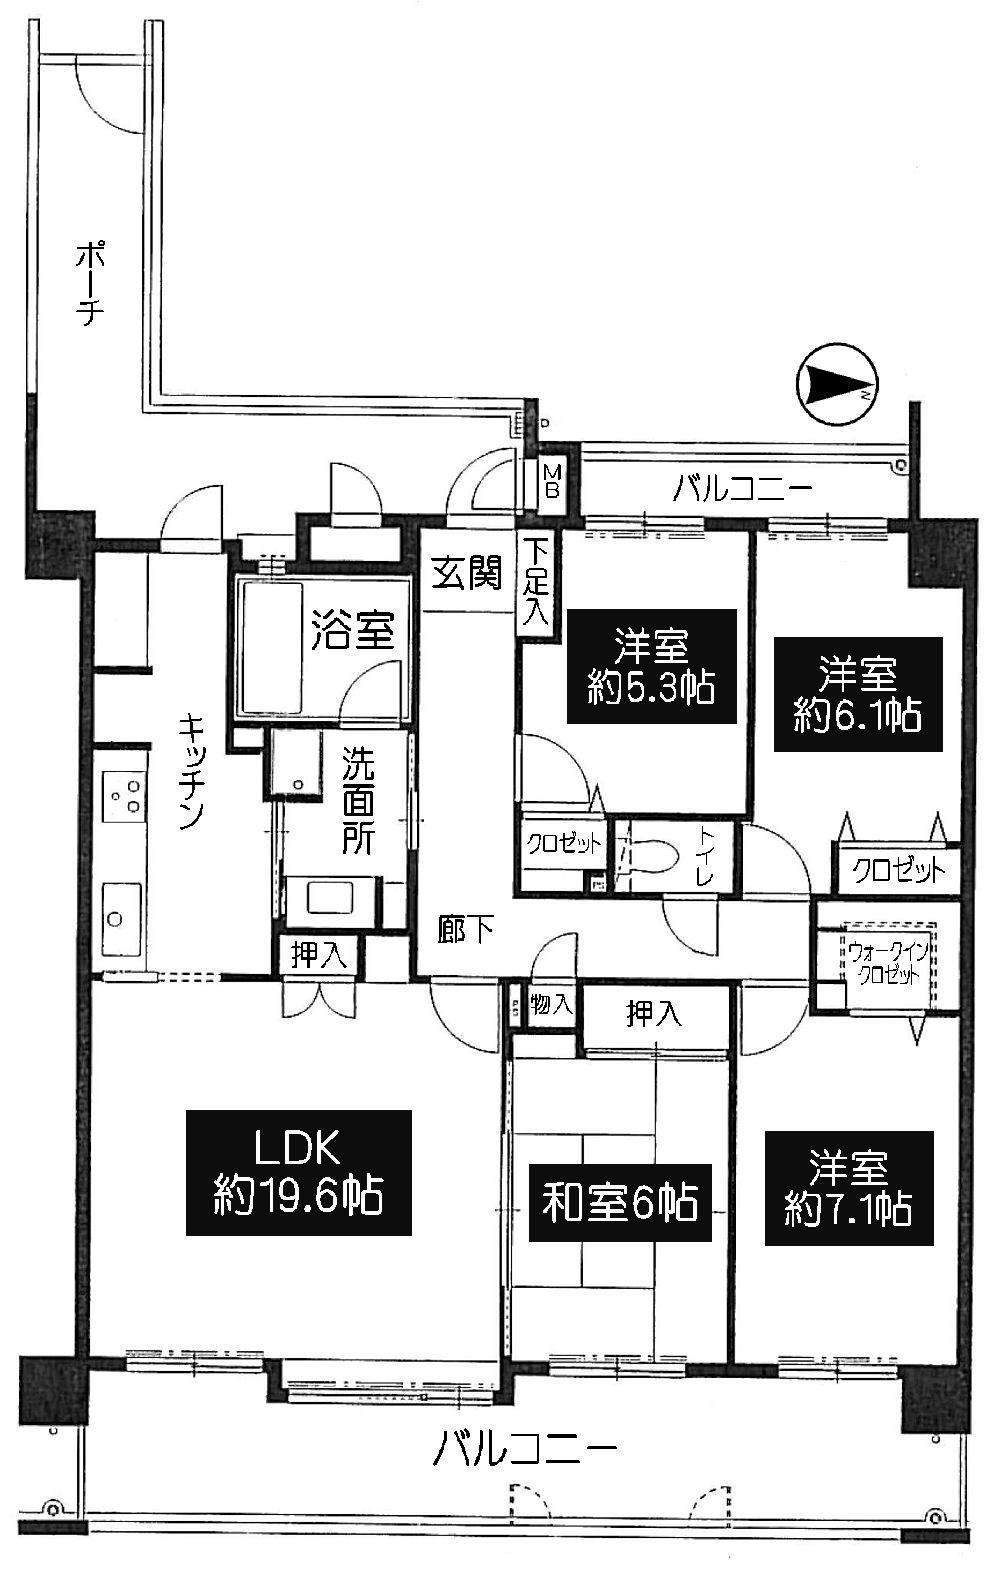 Floor plan. 4LDK, Price 18.9 million yen, Footprint 100.01 sq m , Balcony area 23.15 sq m walk-in closet Yes * storage have in each room * large living room of about 19.6 quires